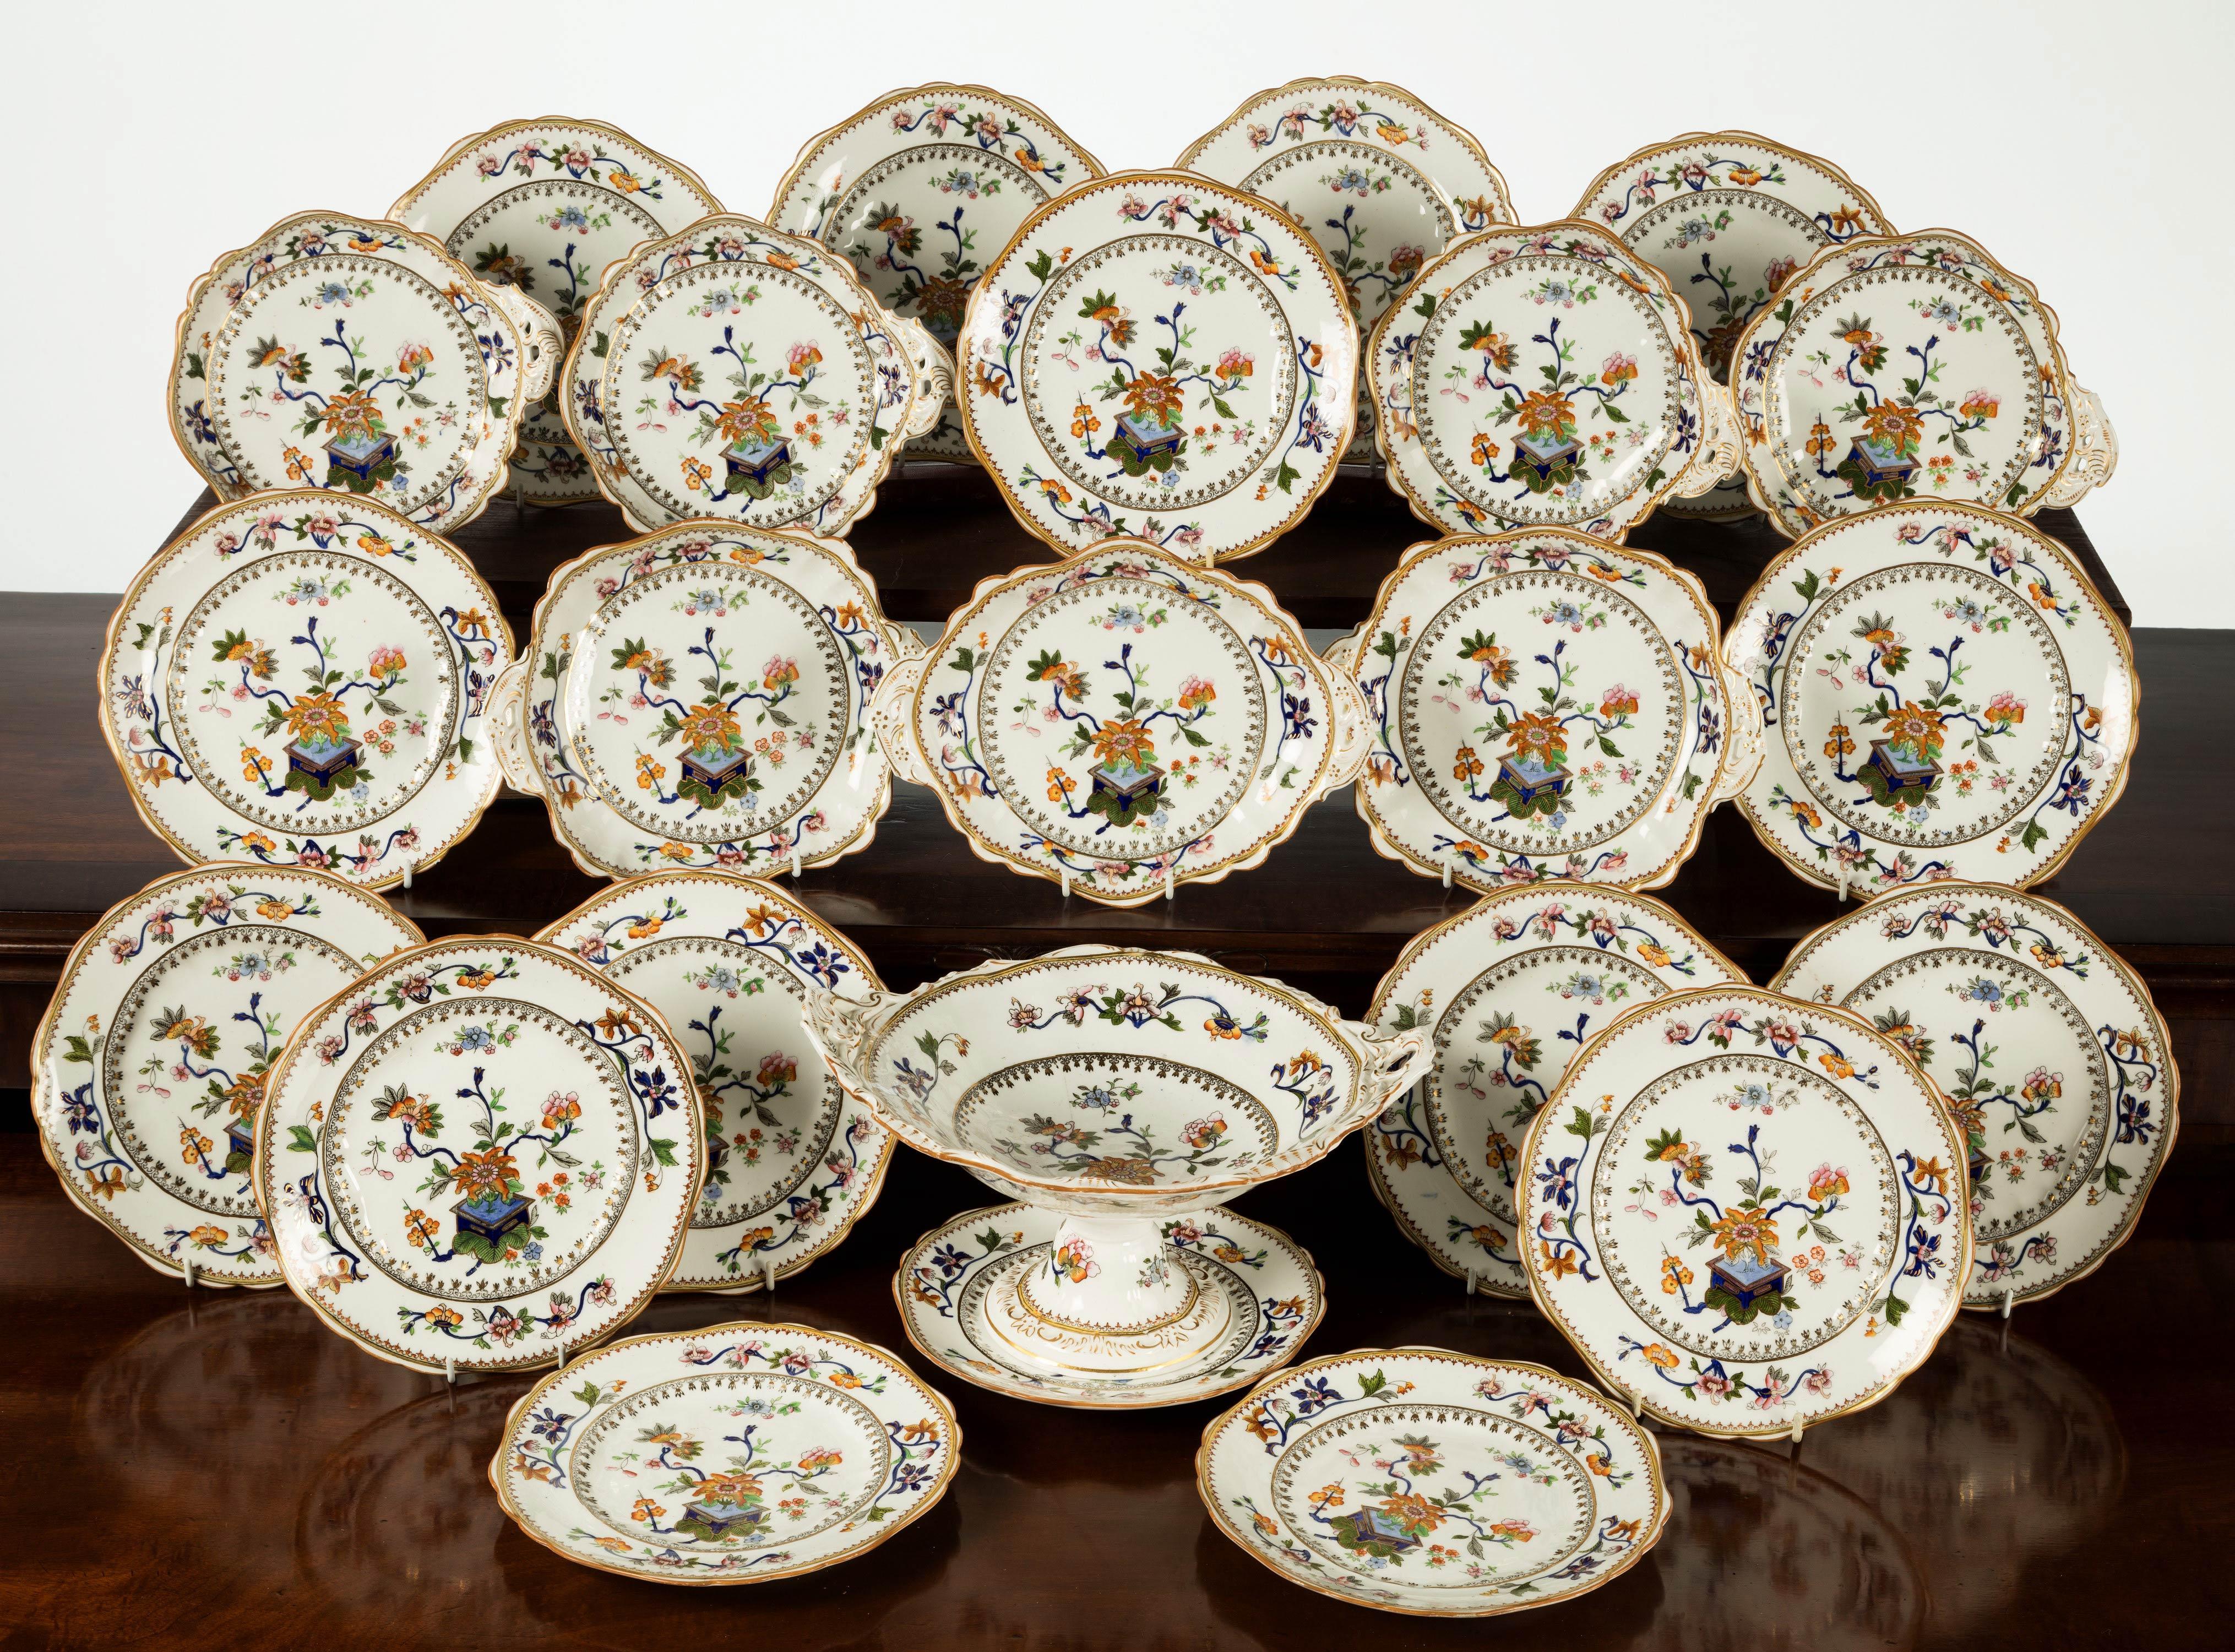 A most attractive late 19th century Staffordshire, porcelain dessert service. Still in crisp condition with well shaped dishes and a compote. Comprising of 24 pieces:

16 plates 9 inches
4 scallop plates - 9 x 8 inches
2 entree dishes - 10 x 8